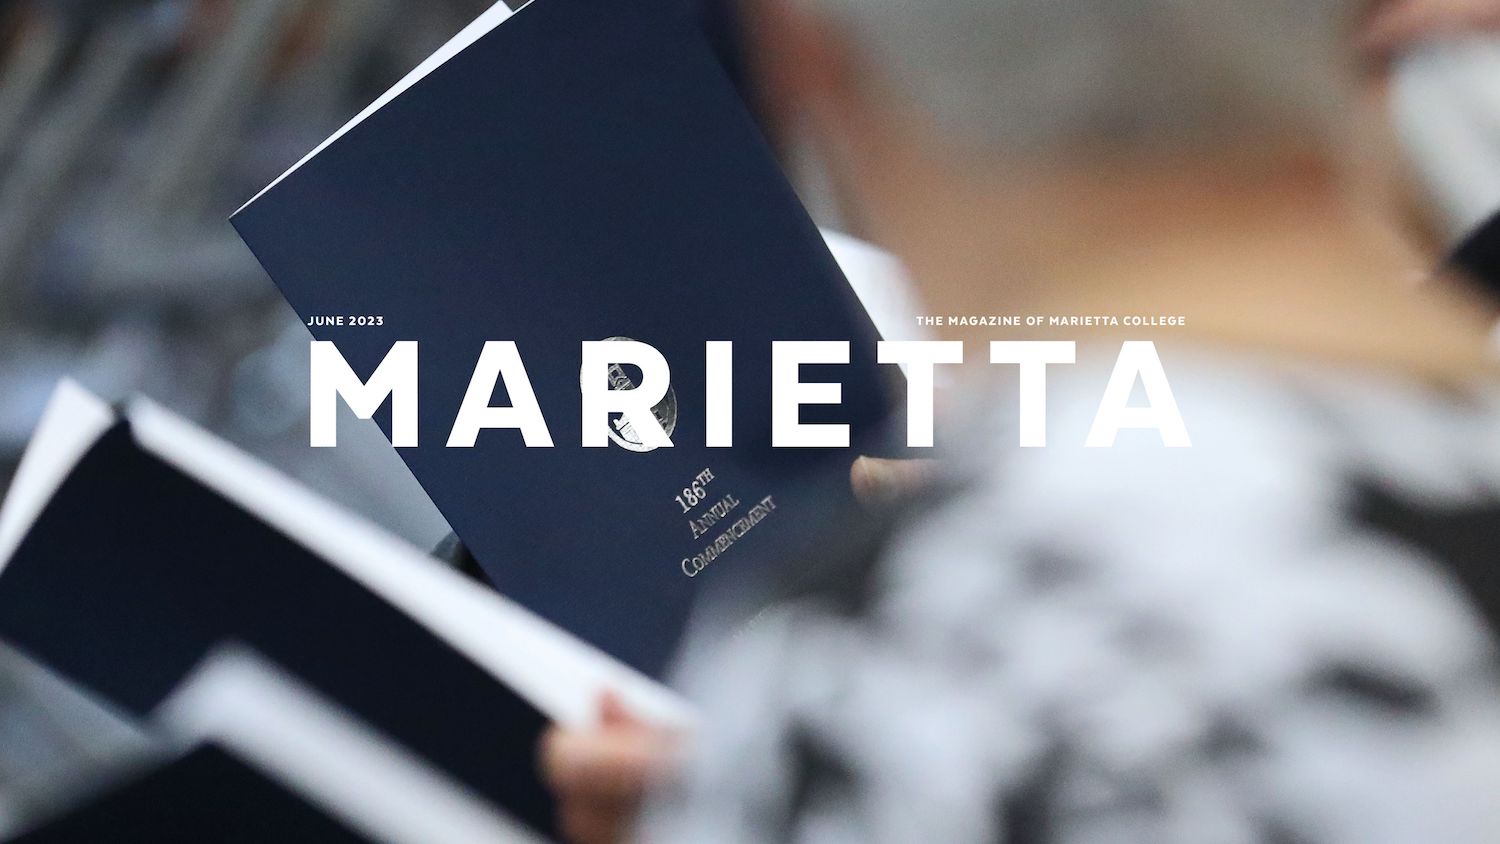 June 2023 Marietta Magazine cover featuring an image of the 186th Annual Commencement program